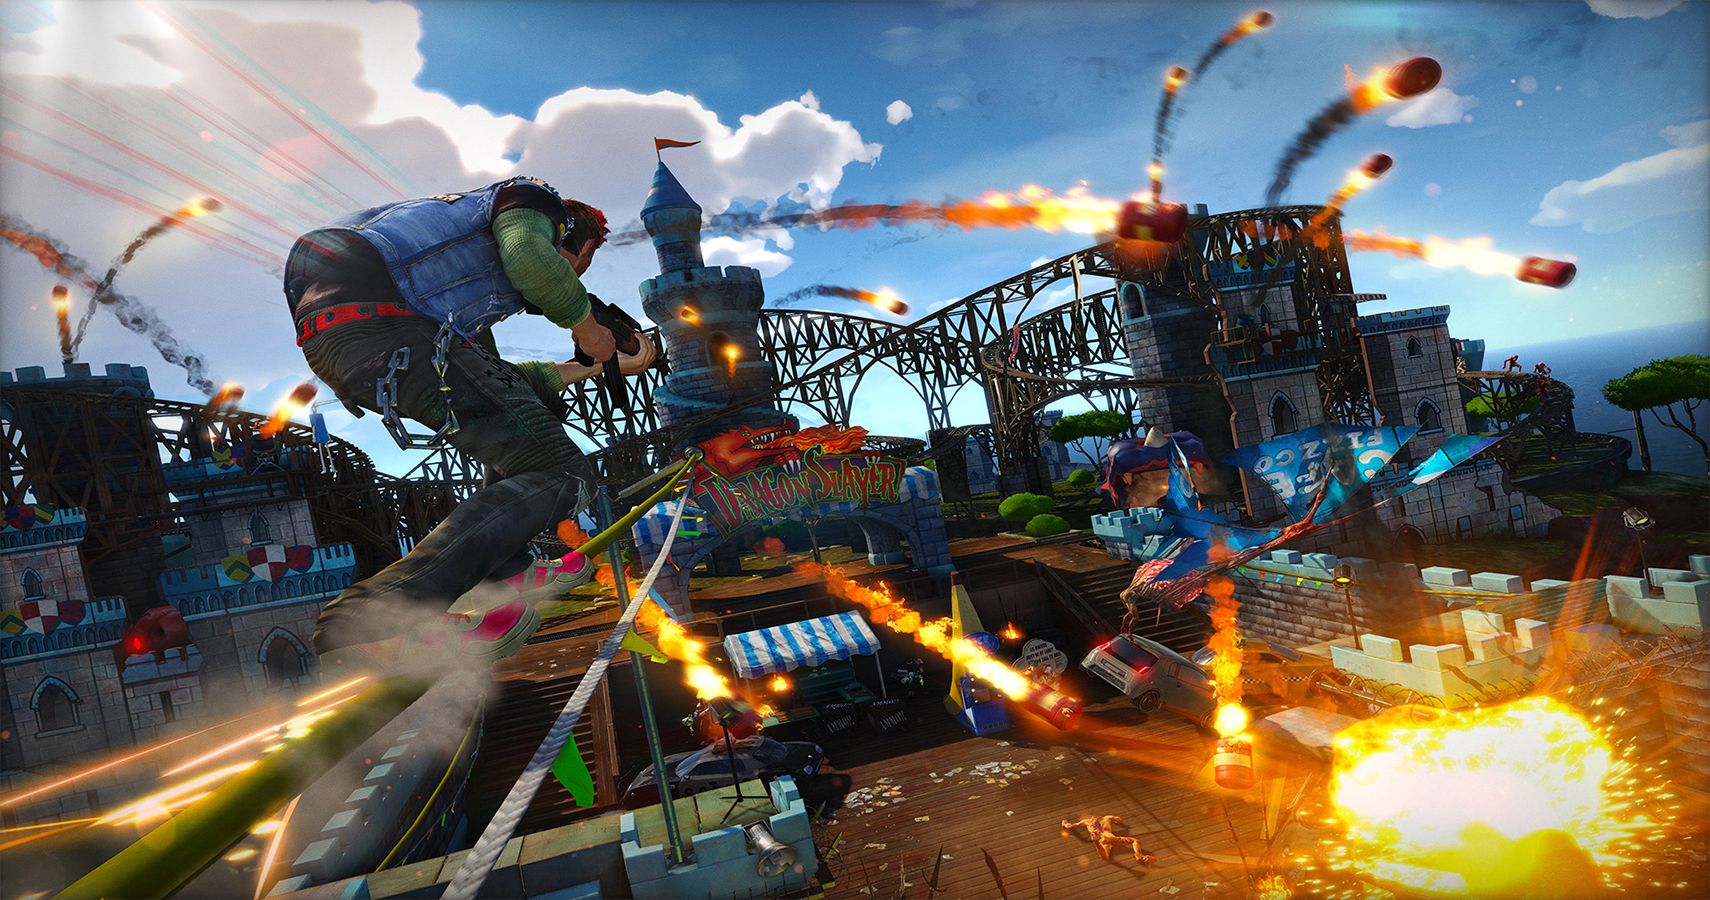 Sunset Overdrive Trademark Registered By Sony - PS5 Port Coming